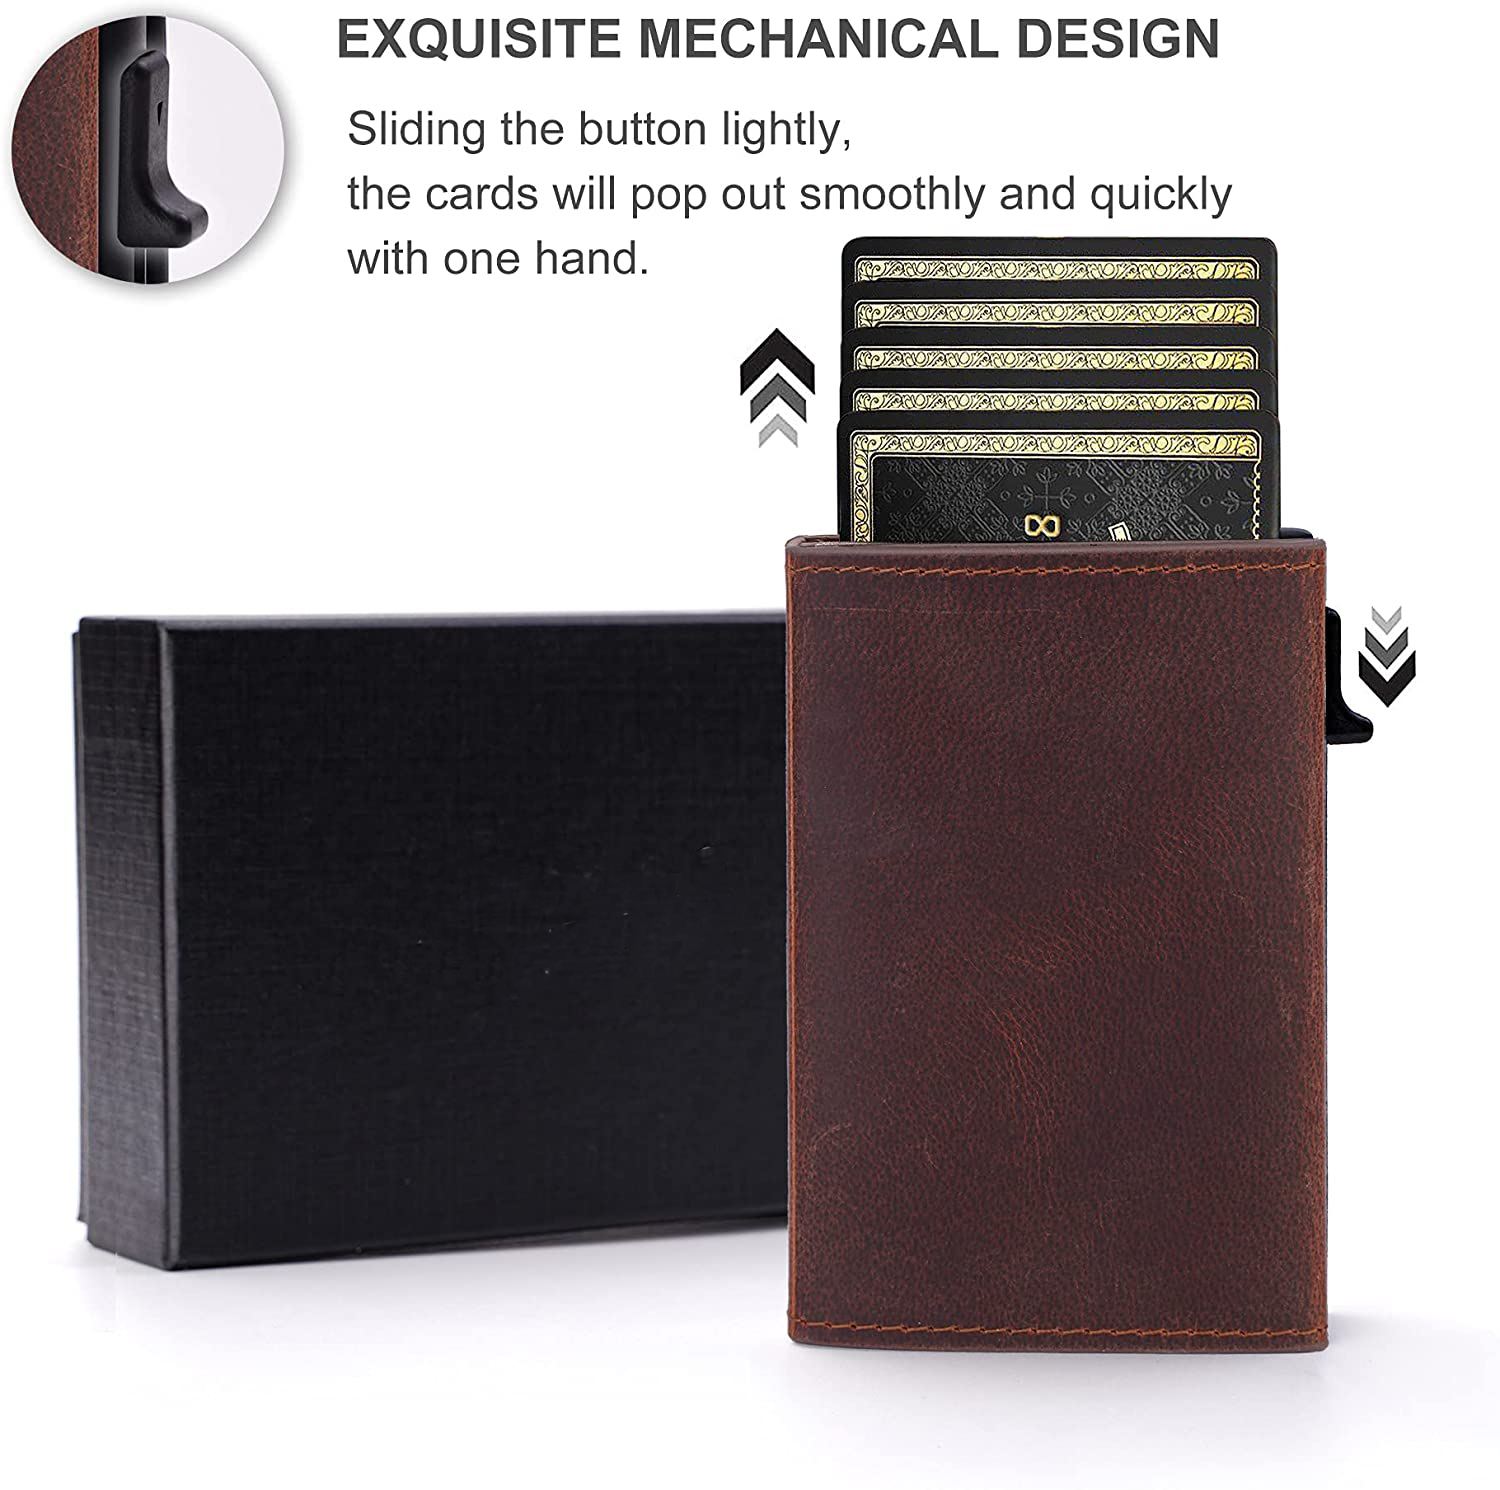 Factory direct wholesale Mens Slim Leather wallet with Money Clip RFID Blocking Credit Card holder Minimalist smart wallet